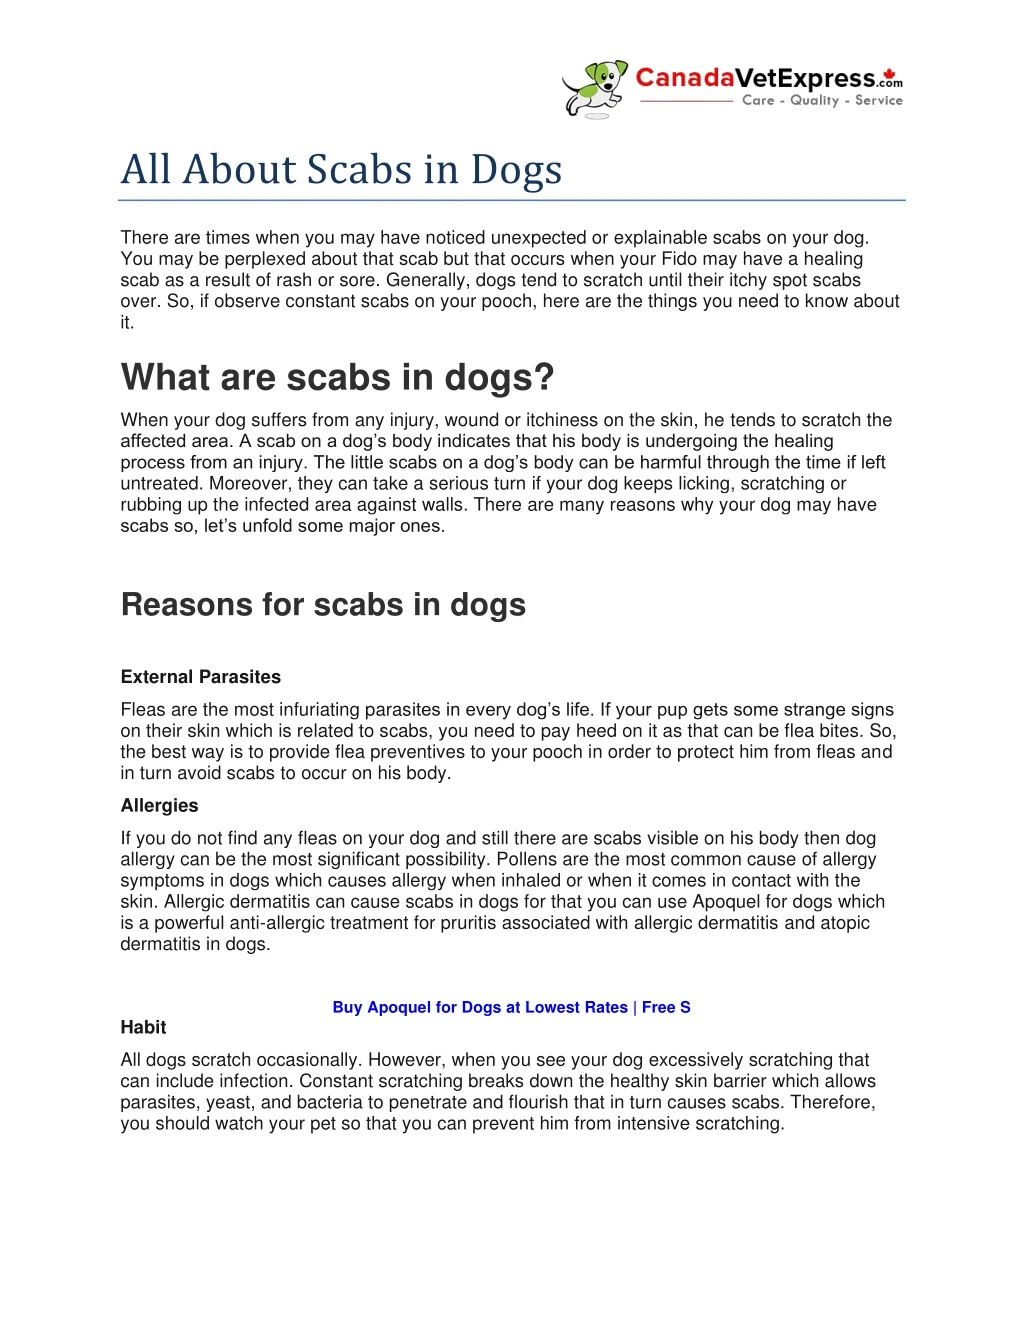 all about scabs in dogs